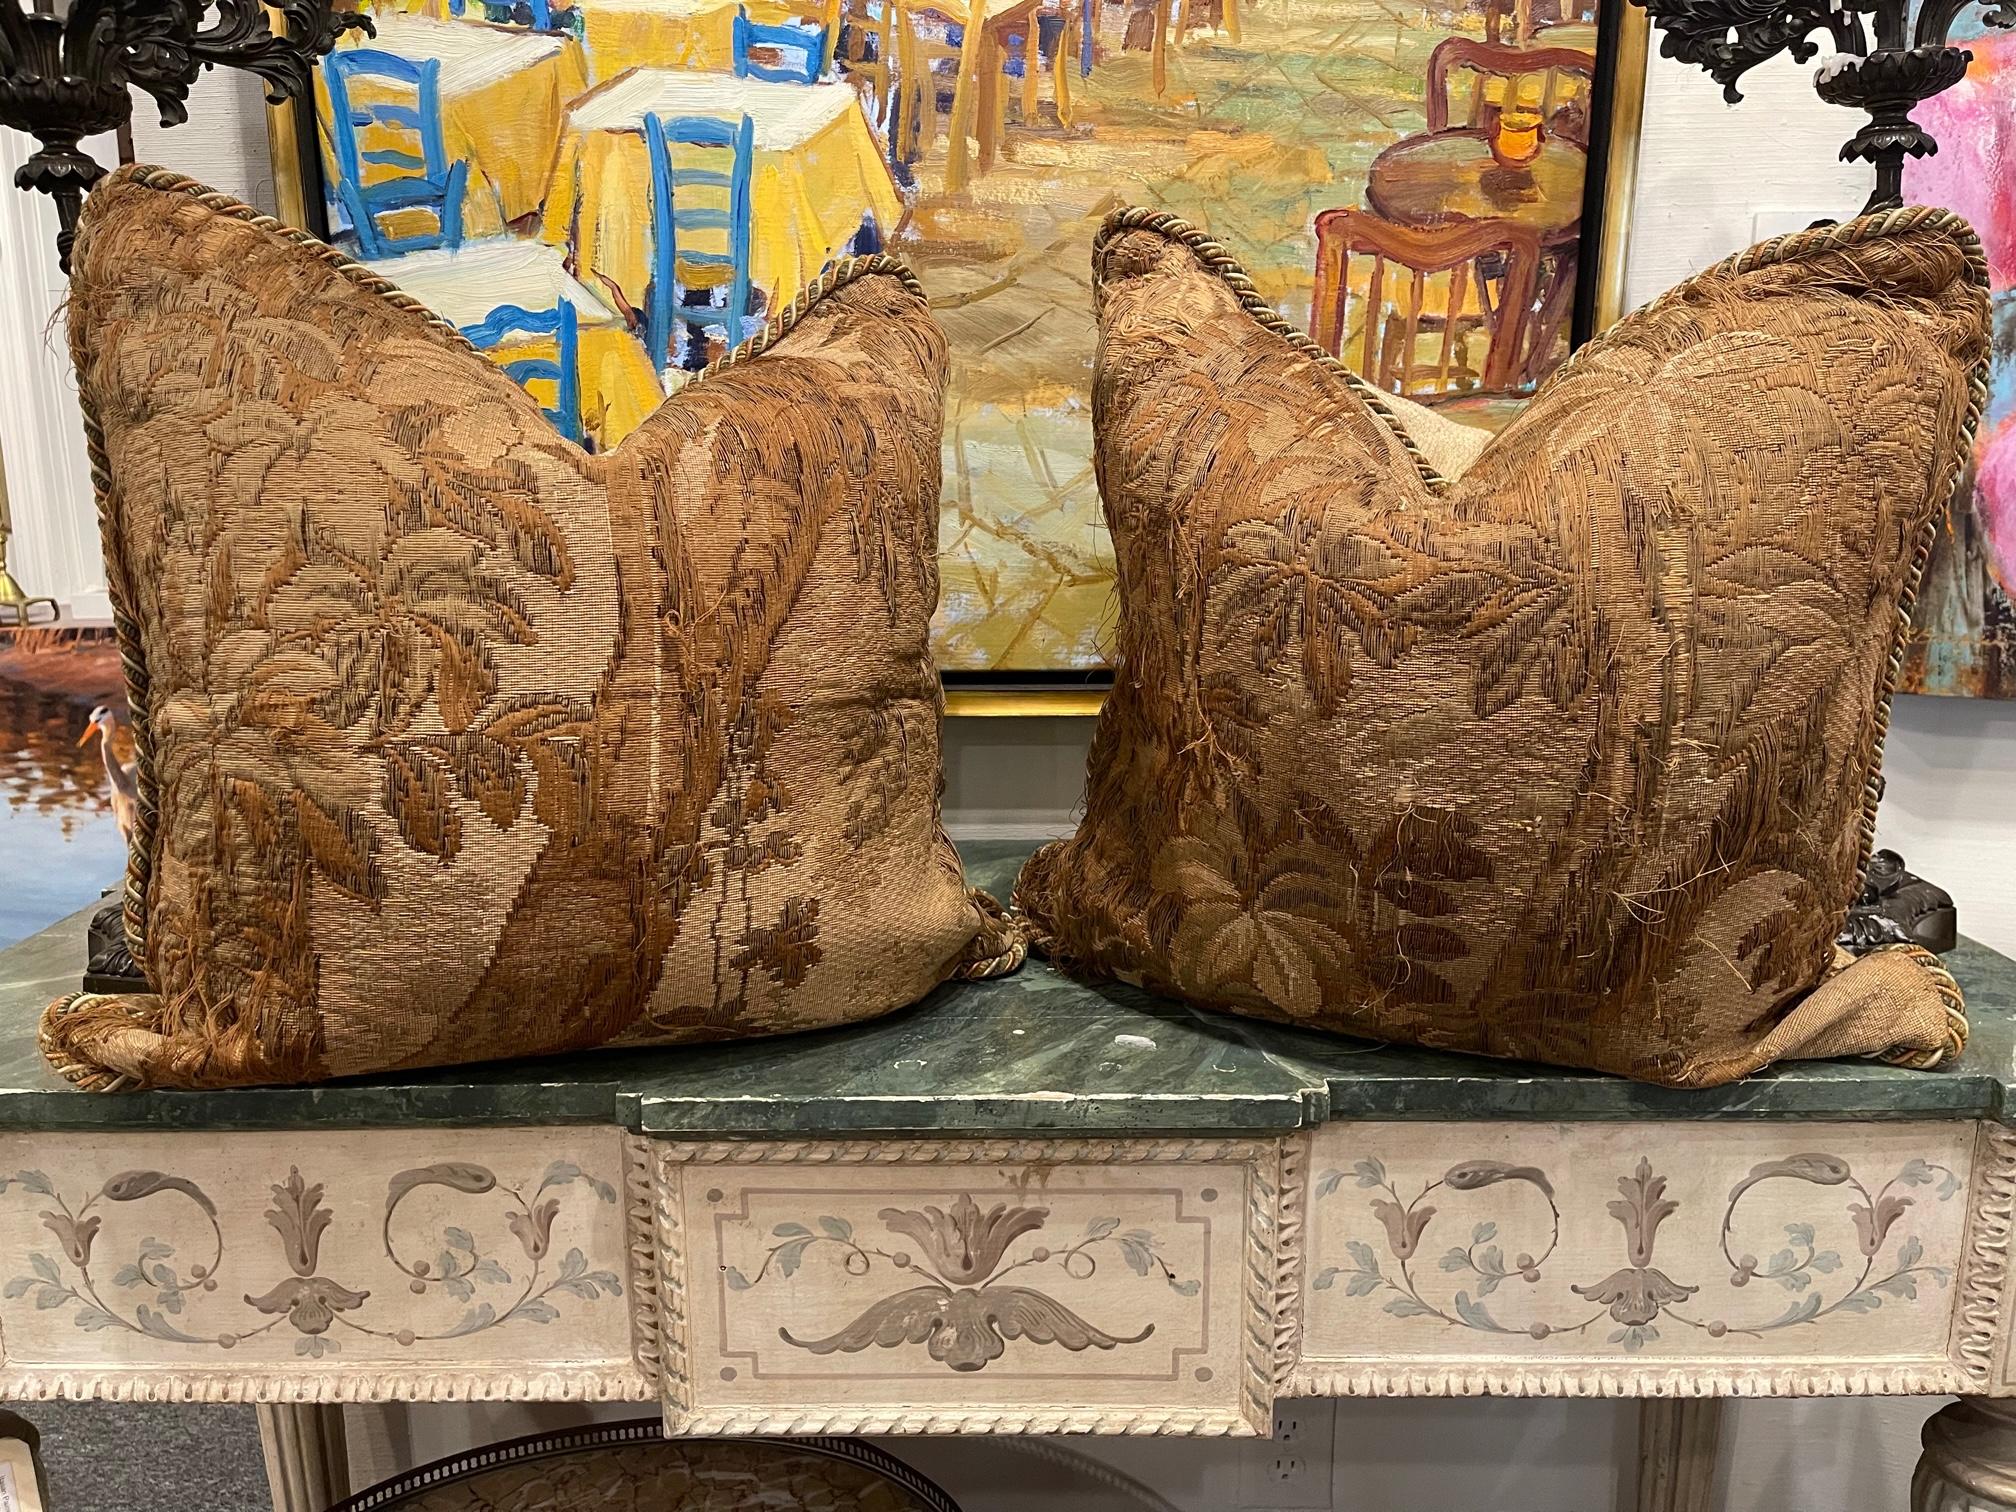 Pair of 18th century Pillows made from an 18th century tapestry fragment depicting trees, leaves, and beautiful flowers. Pillows are backed with chenille, feather down fill, invisible zippers, and decorated with Silk Trim.